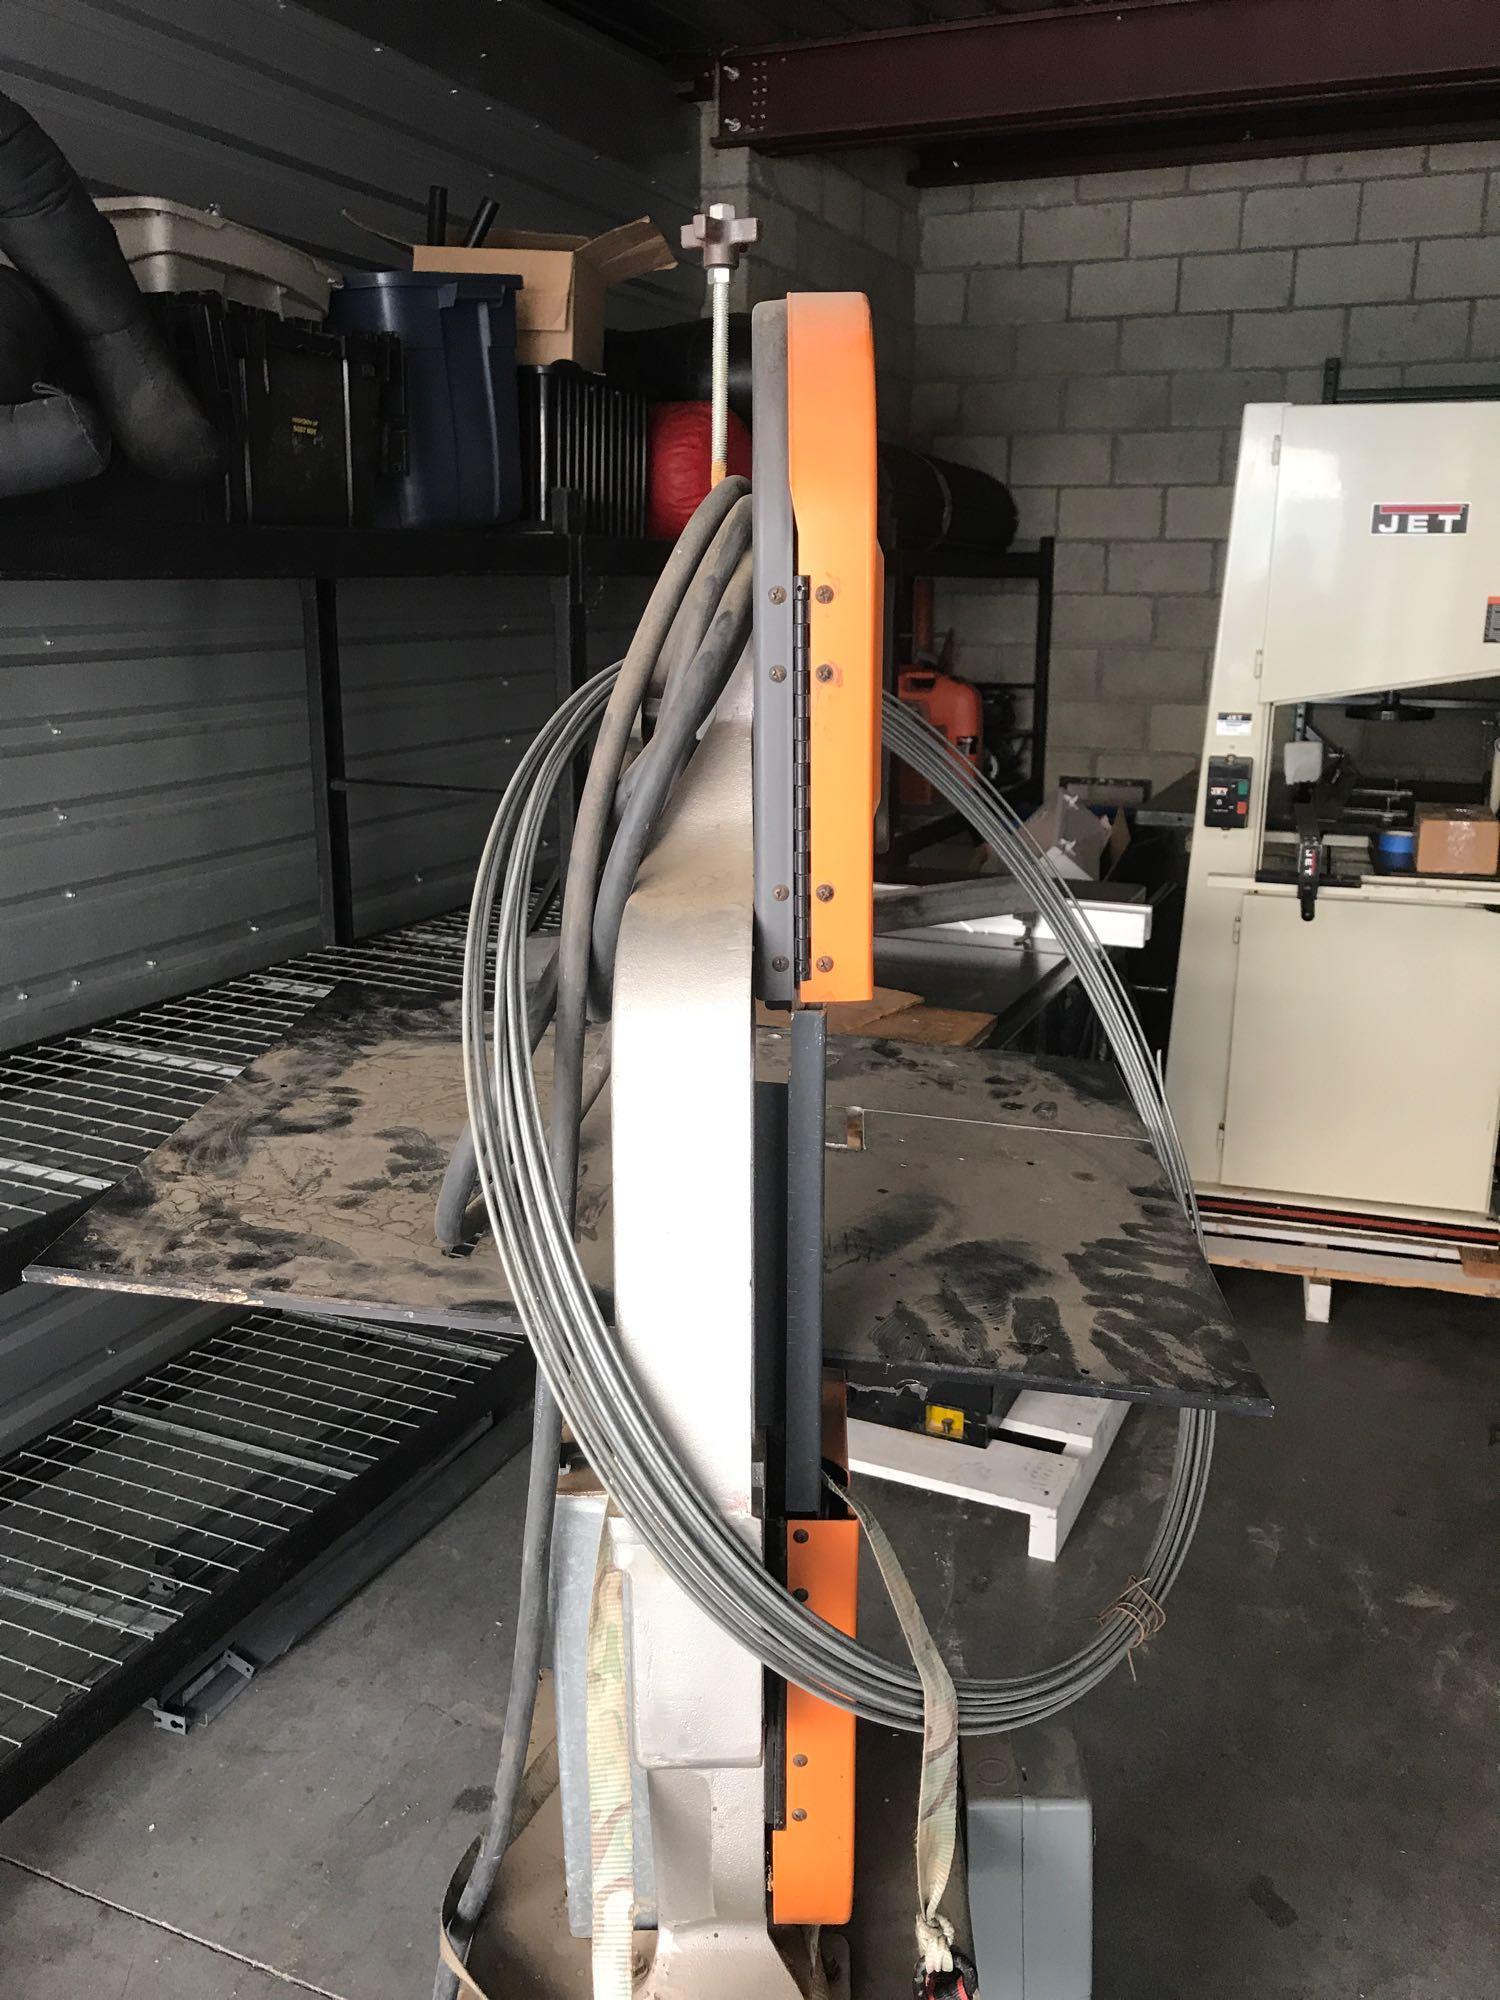 Ridgid BS14002 Band Saw on Rolling Stand